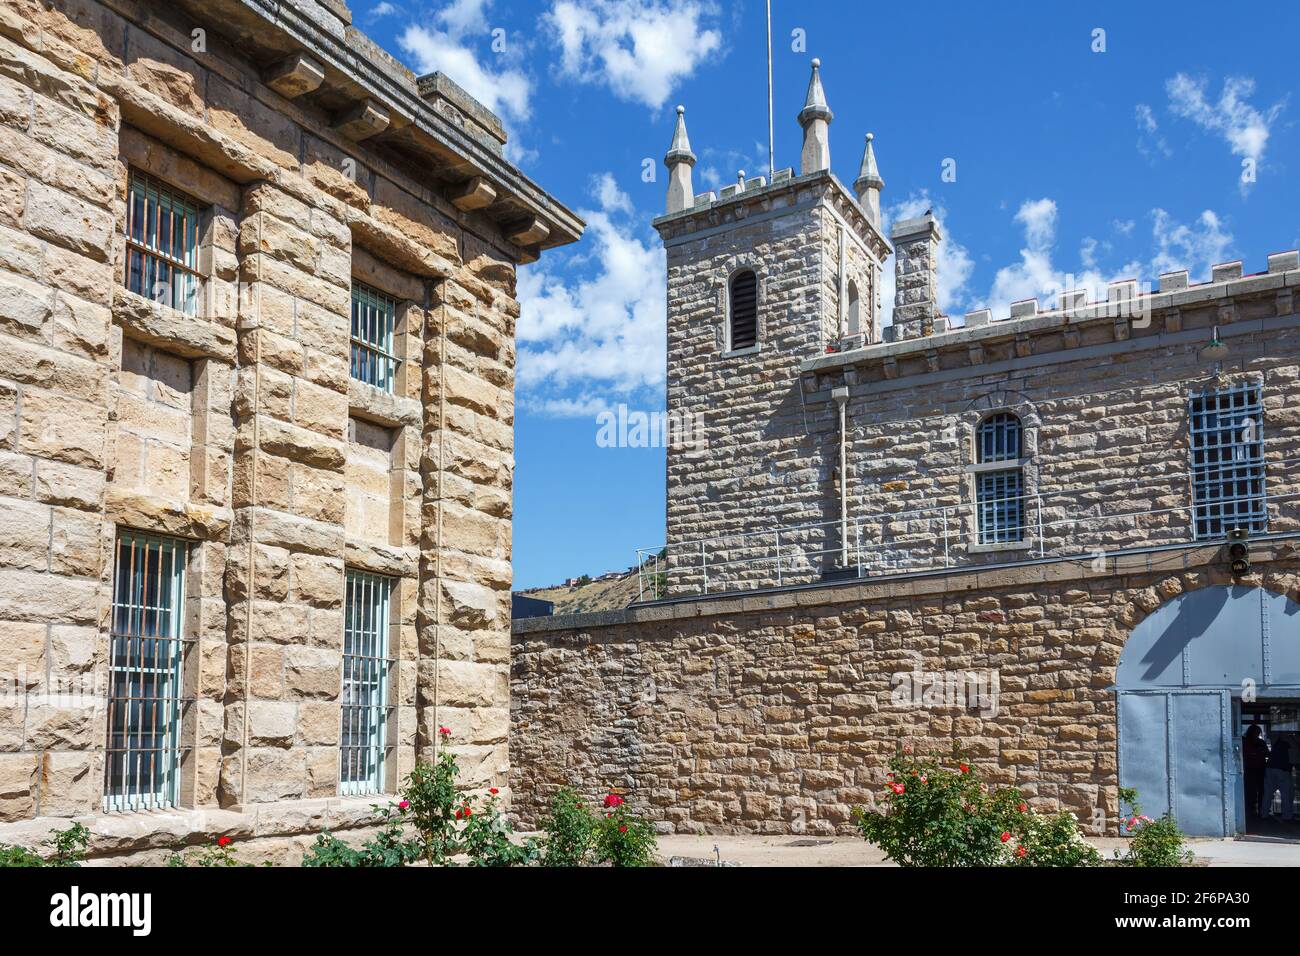 Old Idaho Penitentiary Site in Boise, ID - Historic pre-Colonial territory prison for convicted felons and murderers of 1800's - 1970's, haunted site Stock Photo